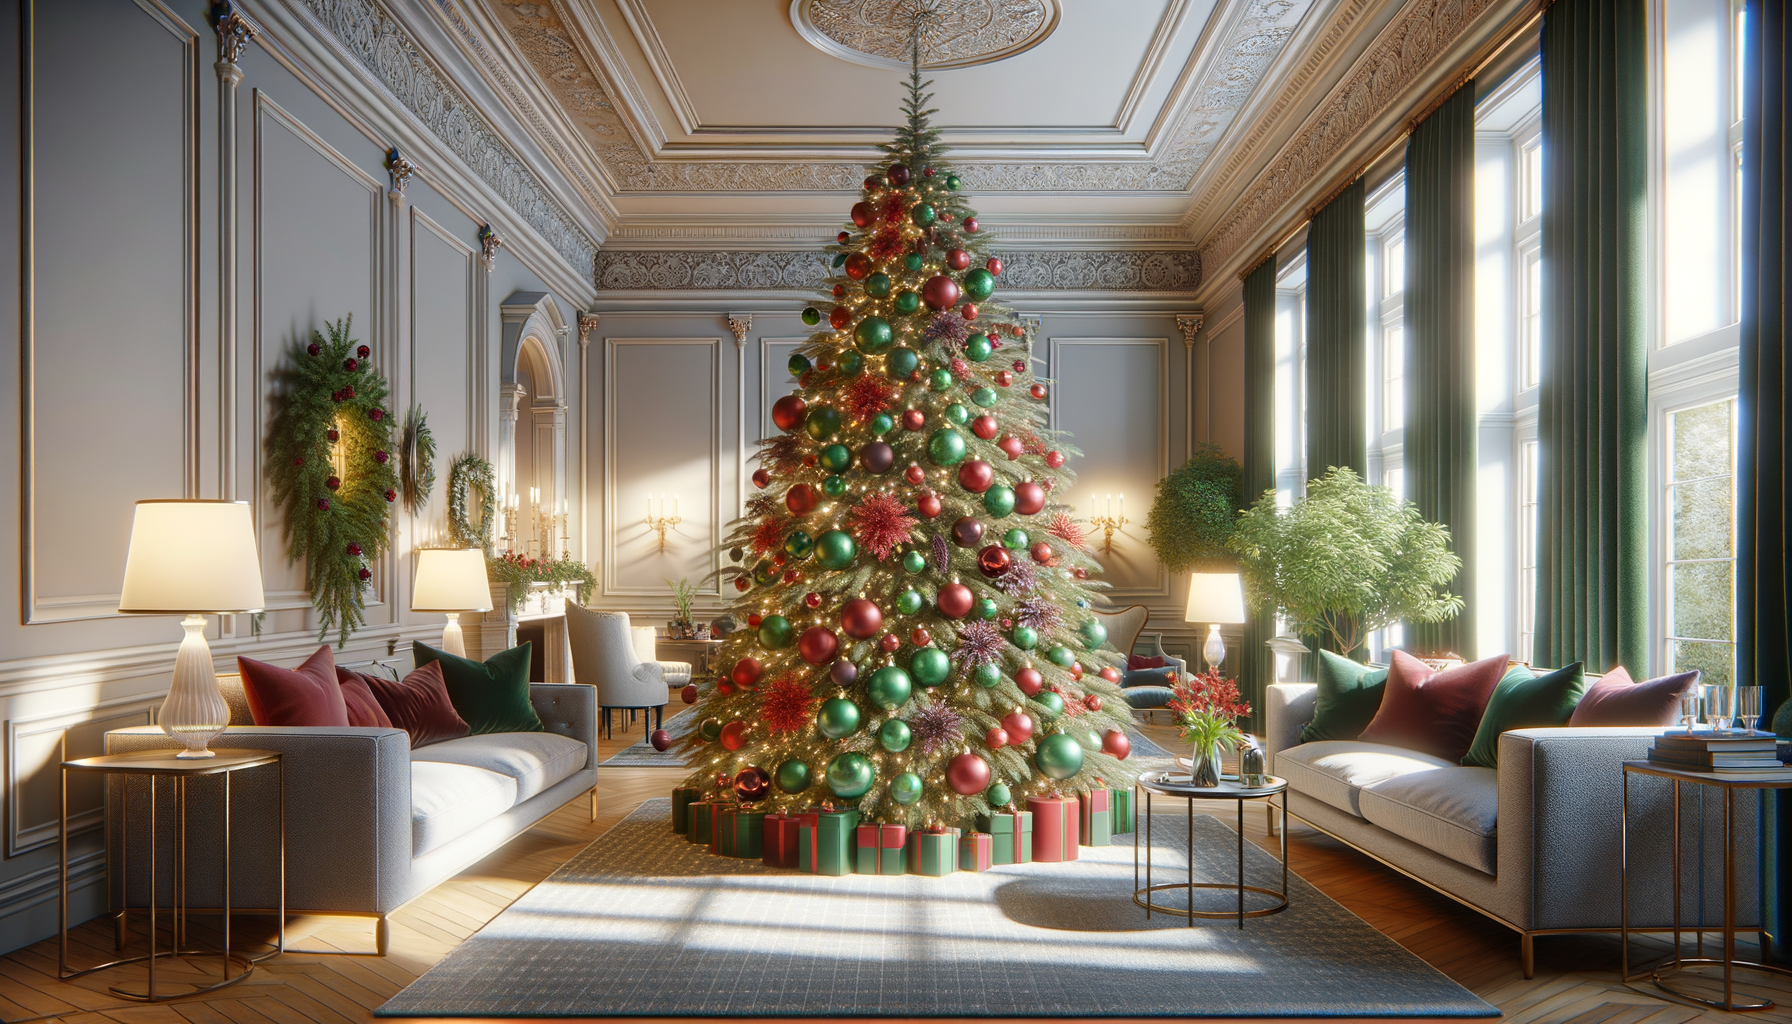 Living room with a large Christmas tree featuring red, burgundy, deep emerald, and forest green ornaments.